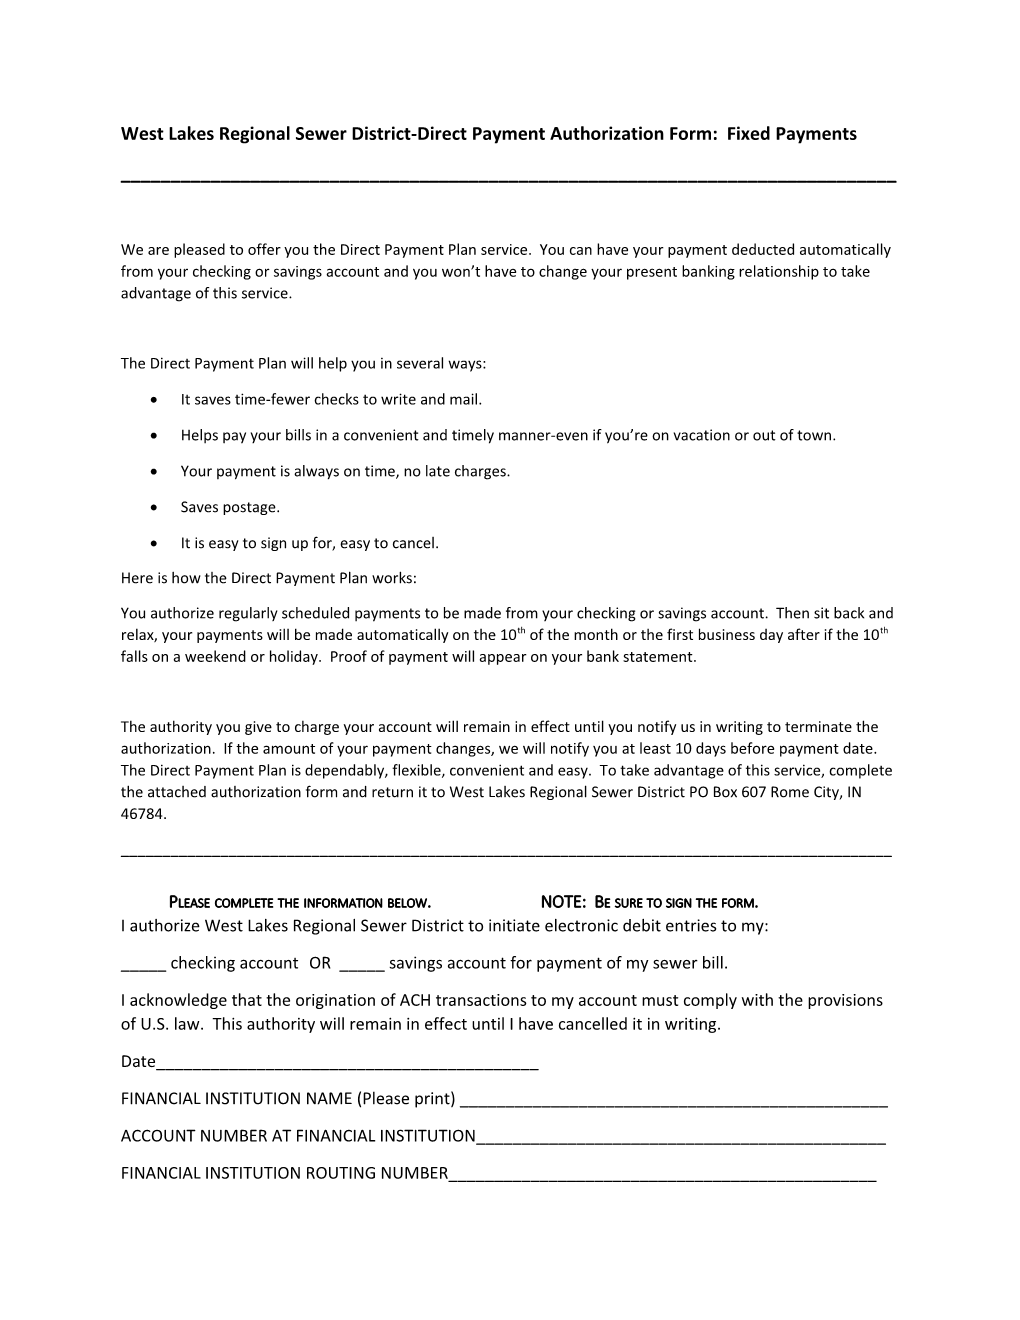 West Lakes Regional Sewer District-Direct Payment Authorization Form: Fixed Payments